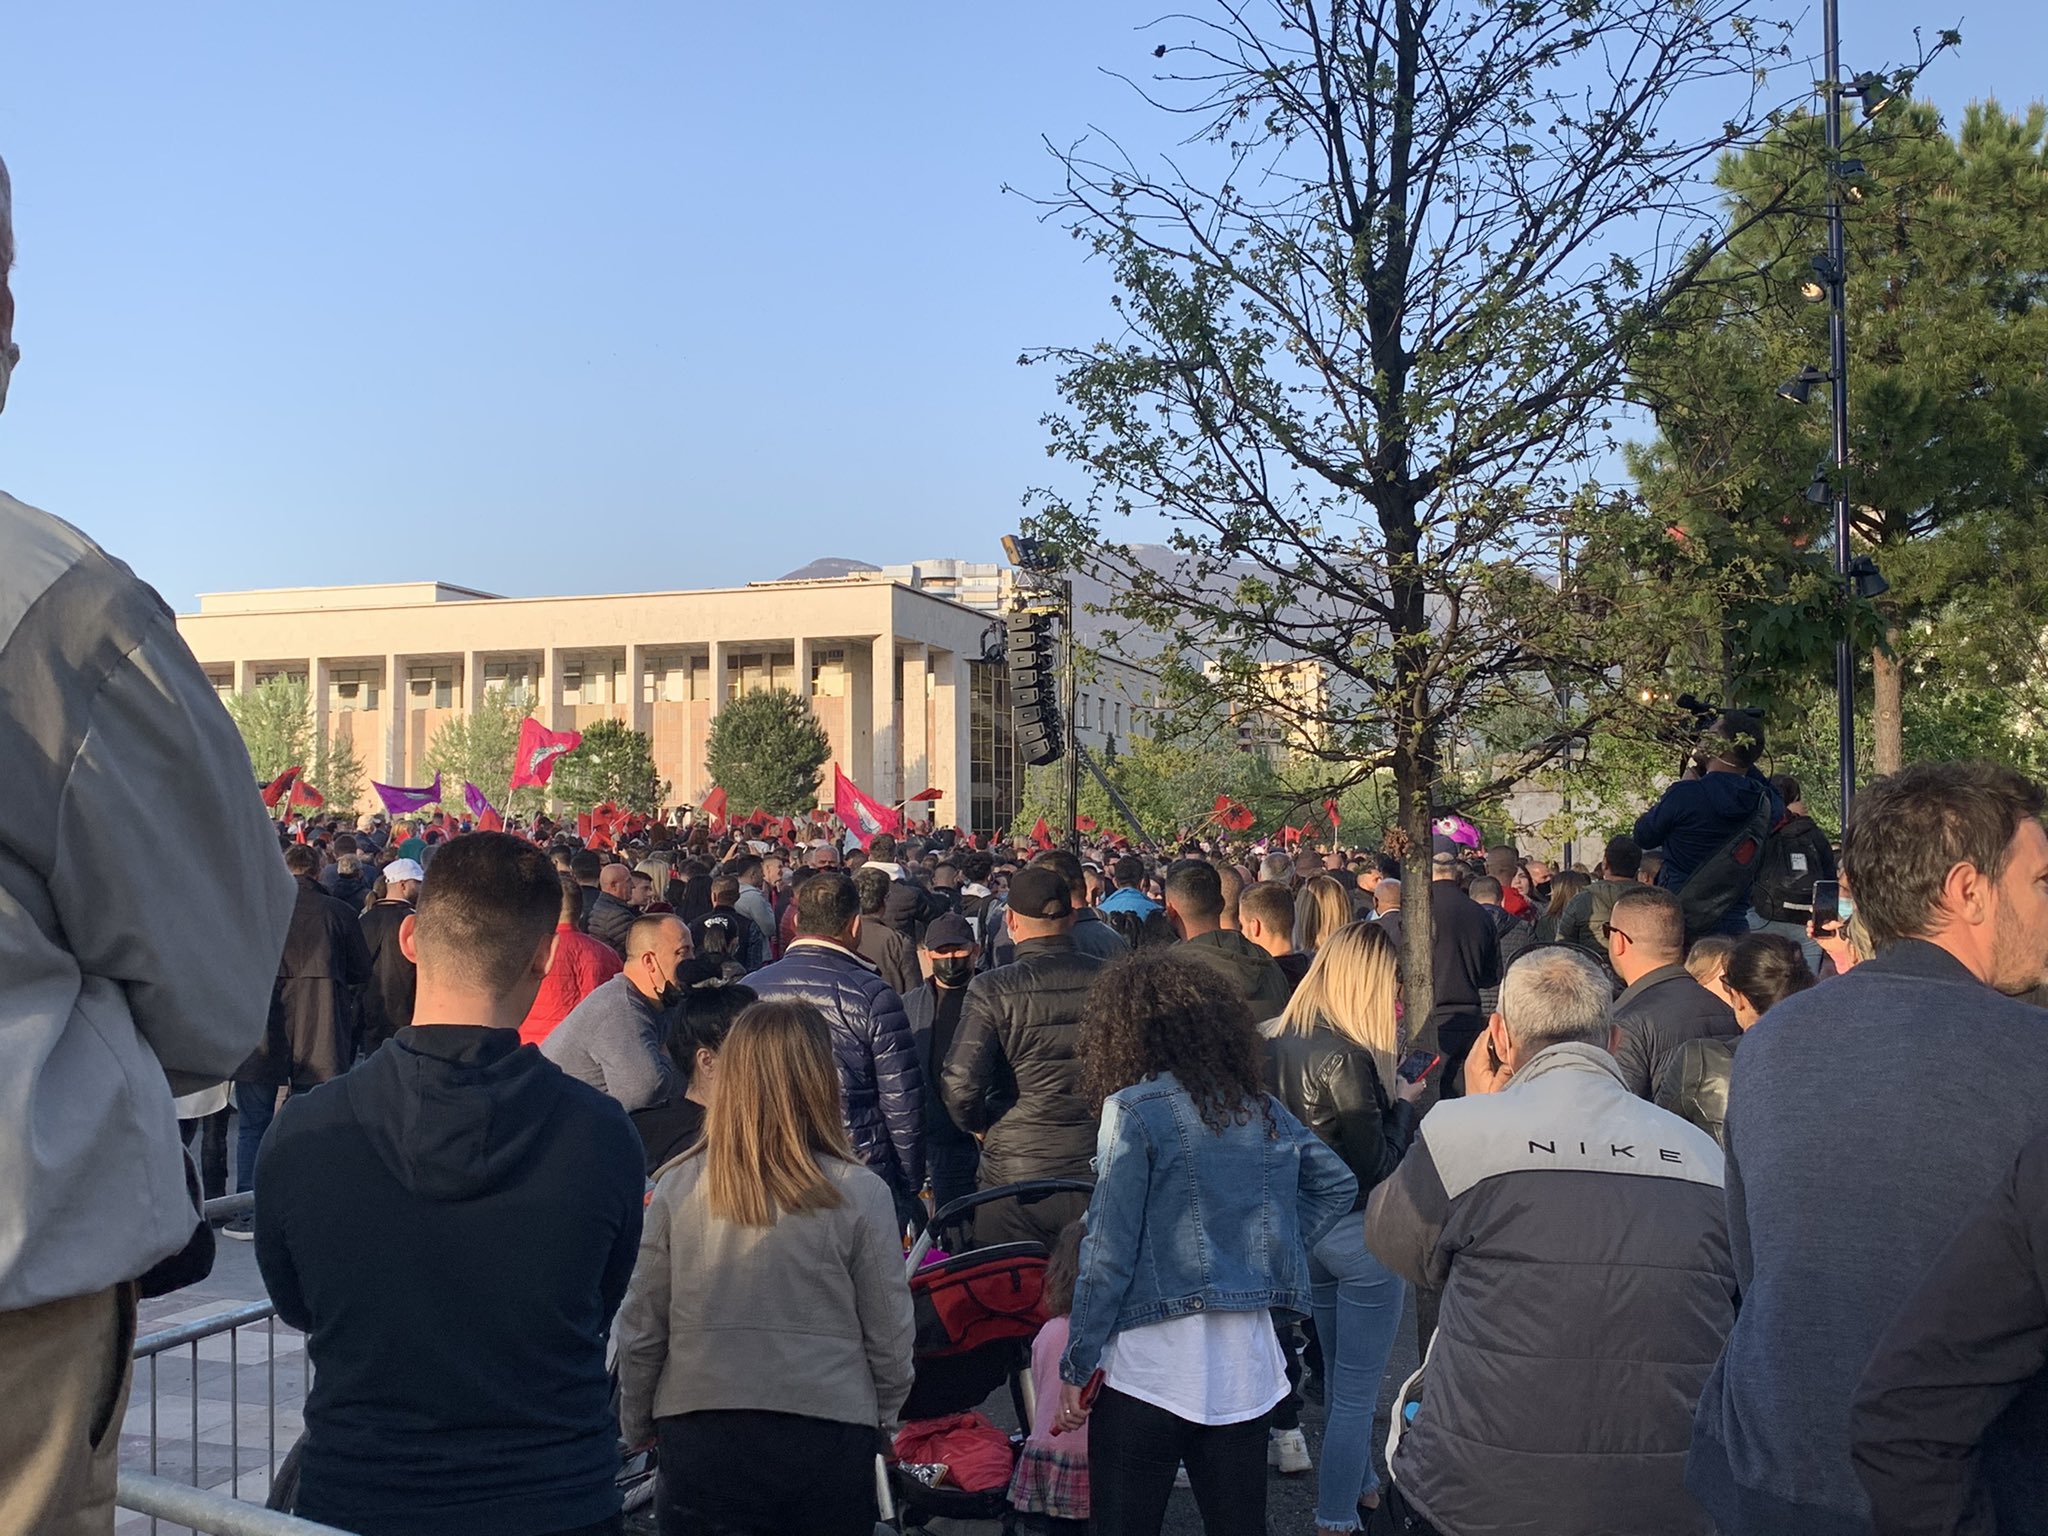 Victorious Albanian Prime Minister Gathers Thousands for Celebrations